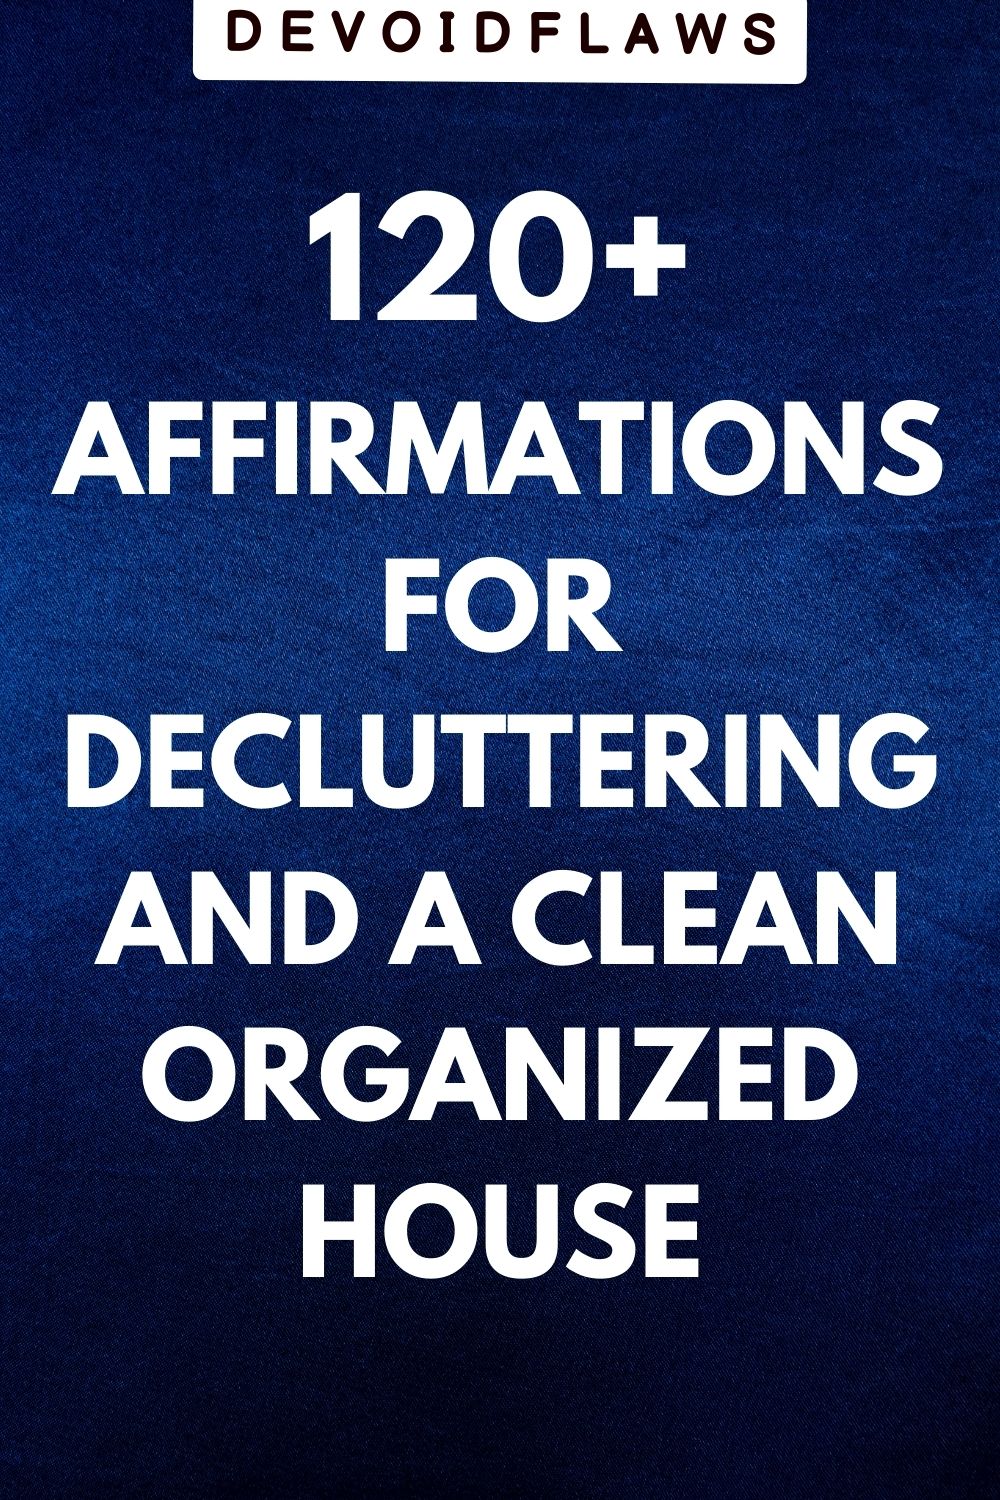 blue background image with text "120+ affirmations for decluttering and a clean organized house"